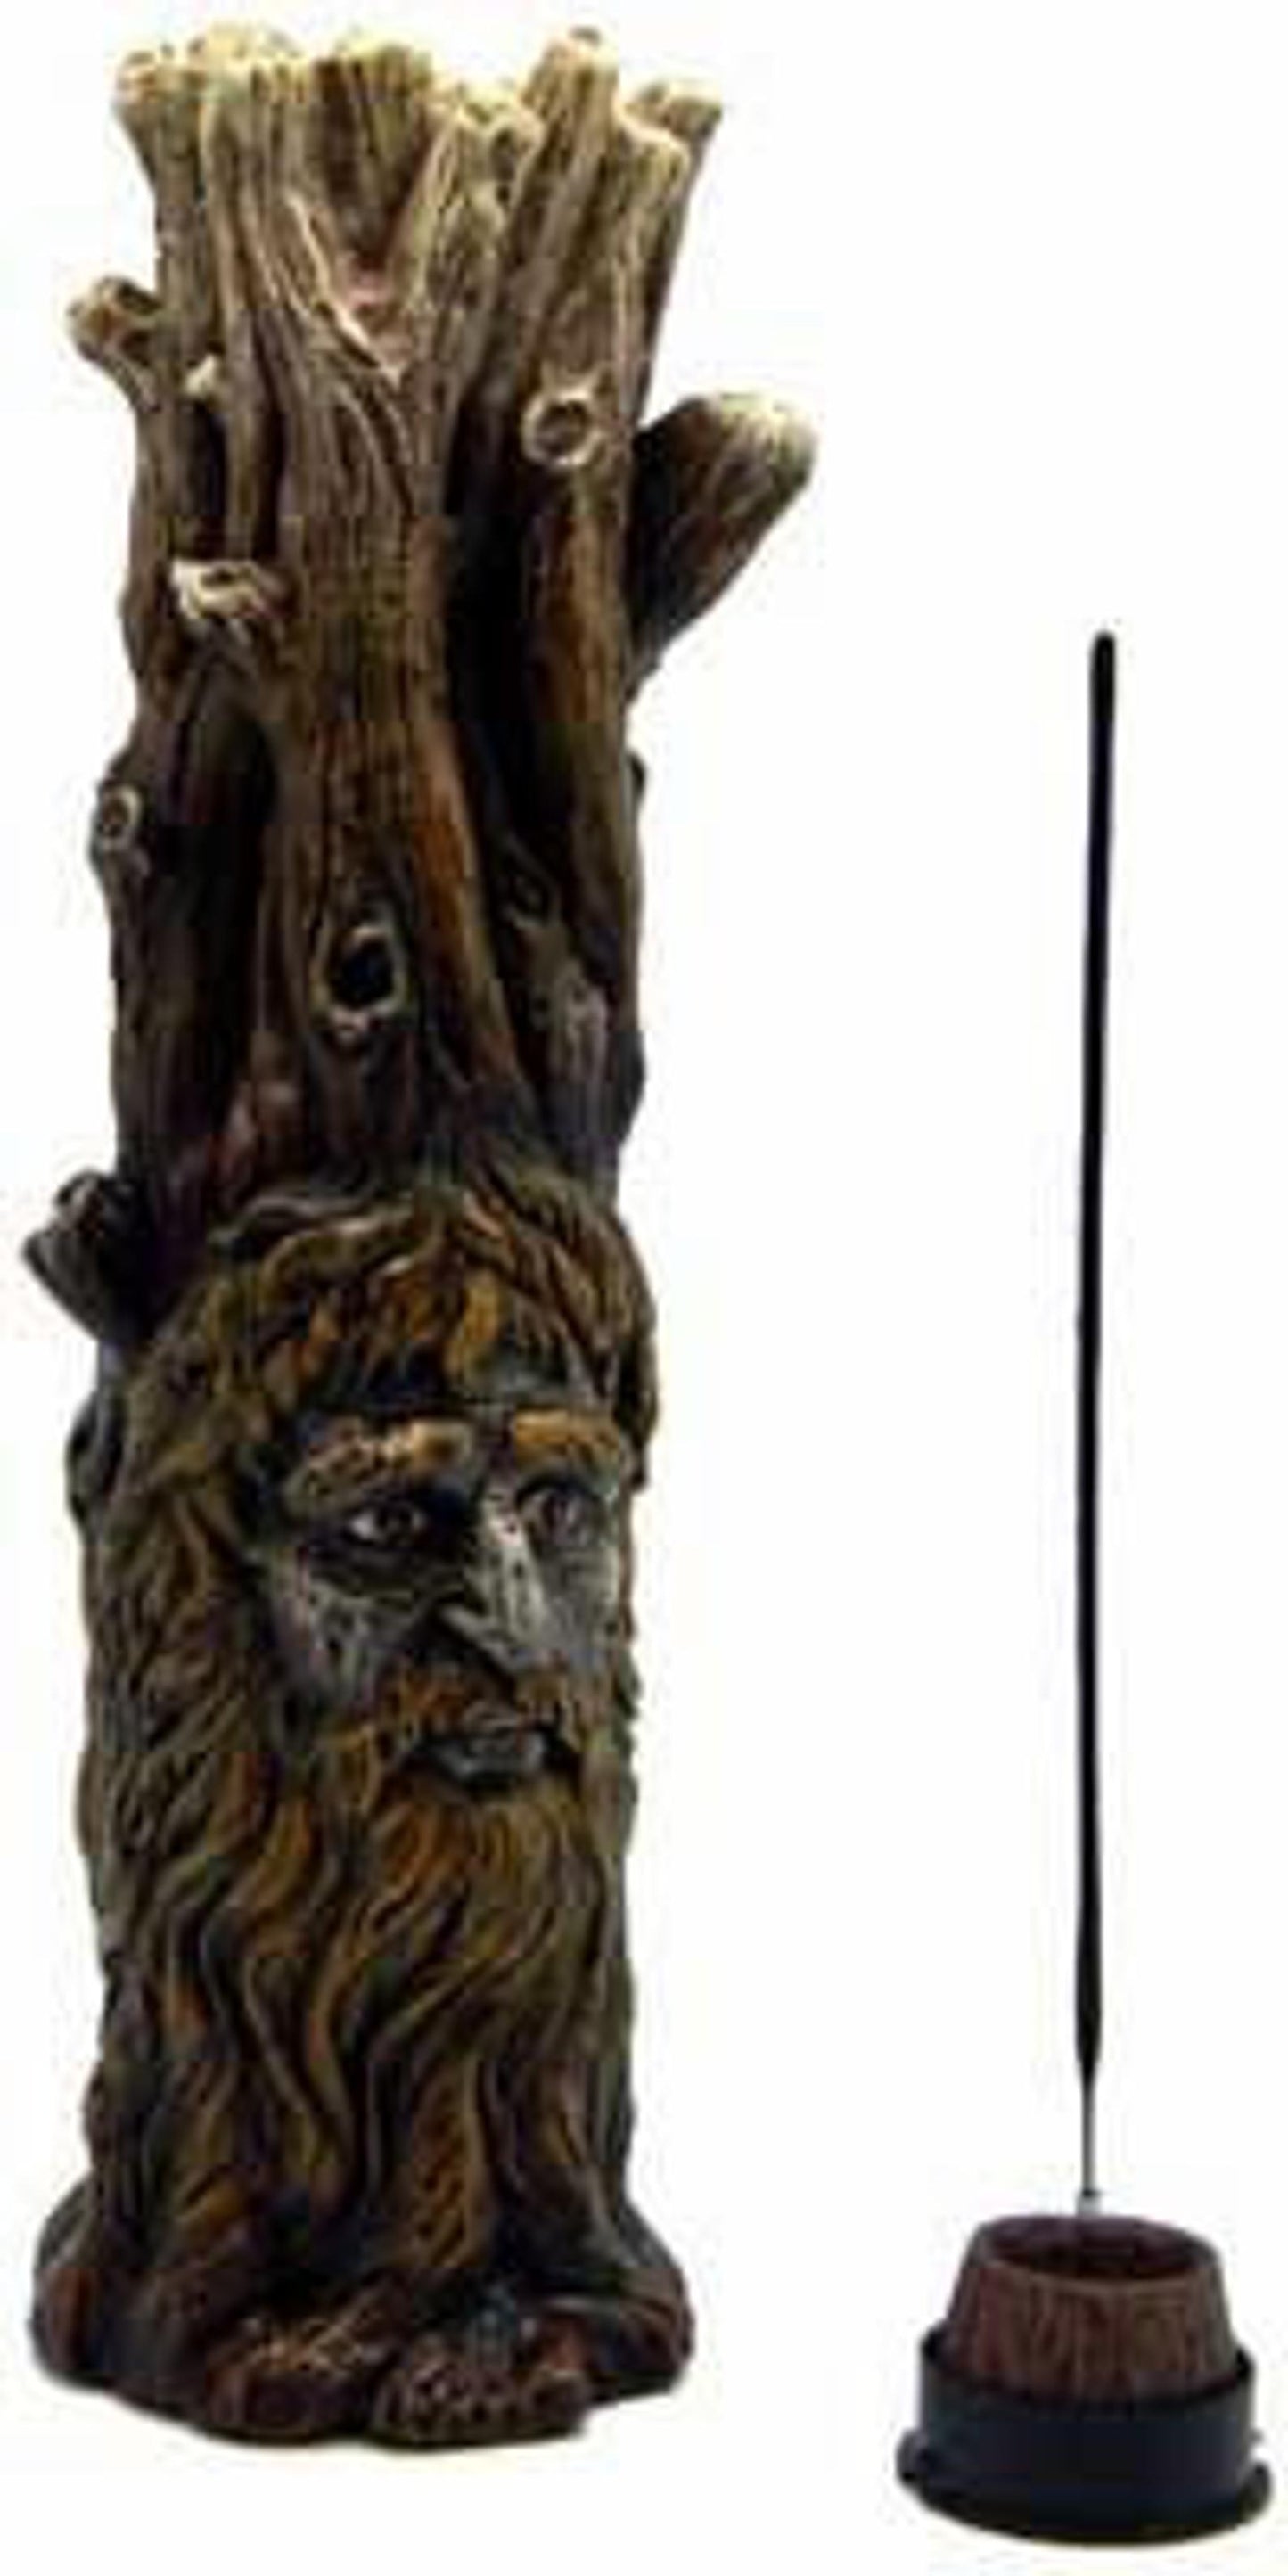 Incense Smoker that resembles a tree with a face in it.  Headshop Vancouver Canada.